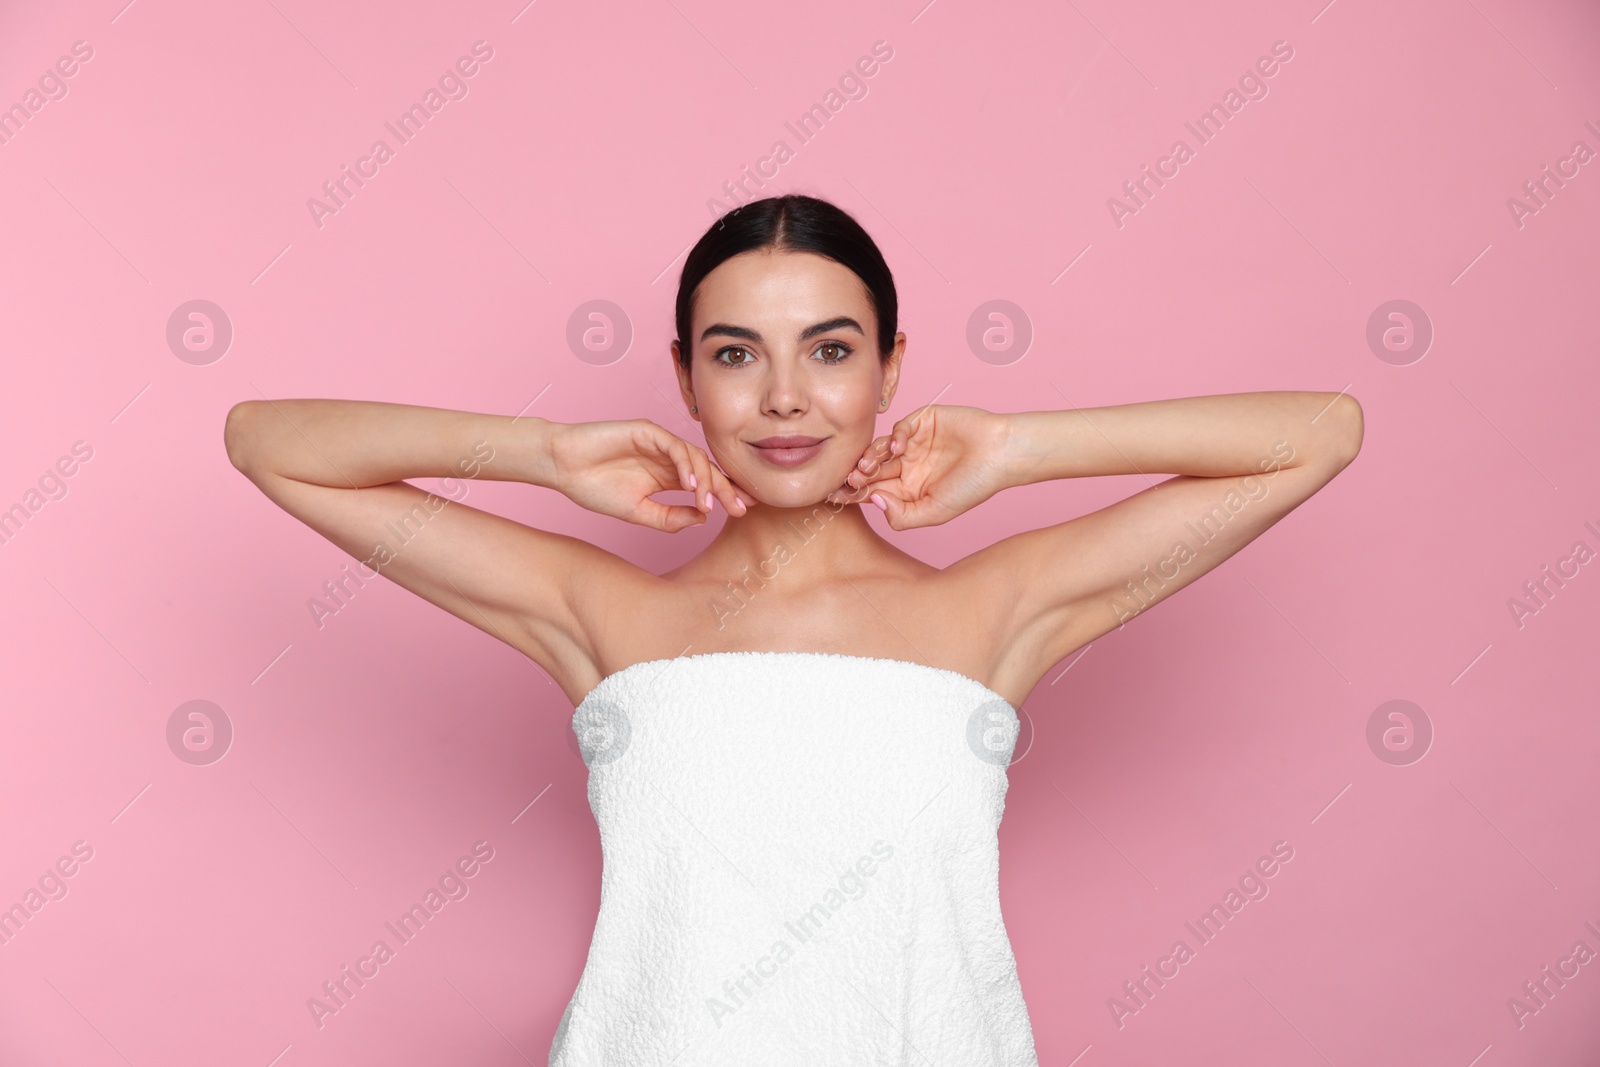 Photo of Young woman showing smooth skin after epilation on pink background